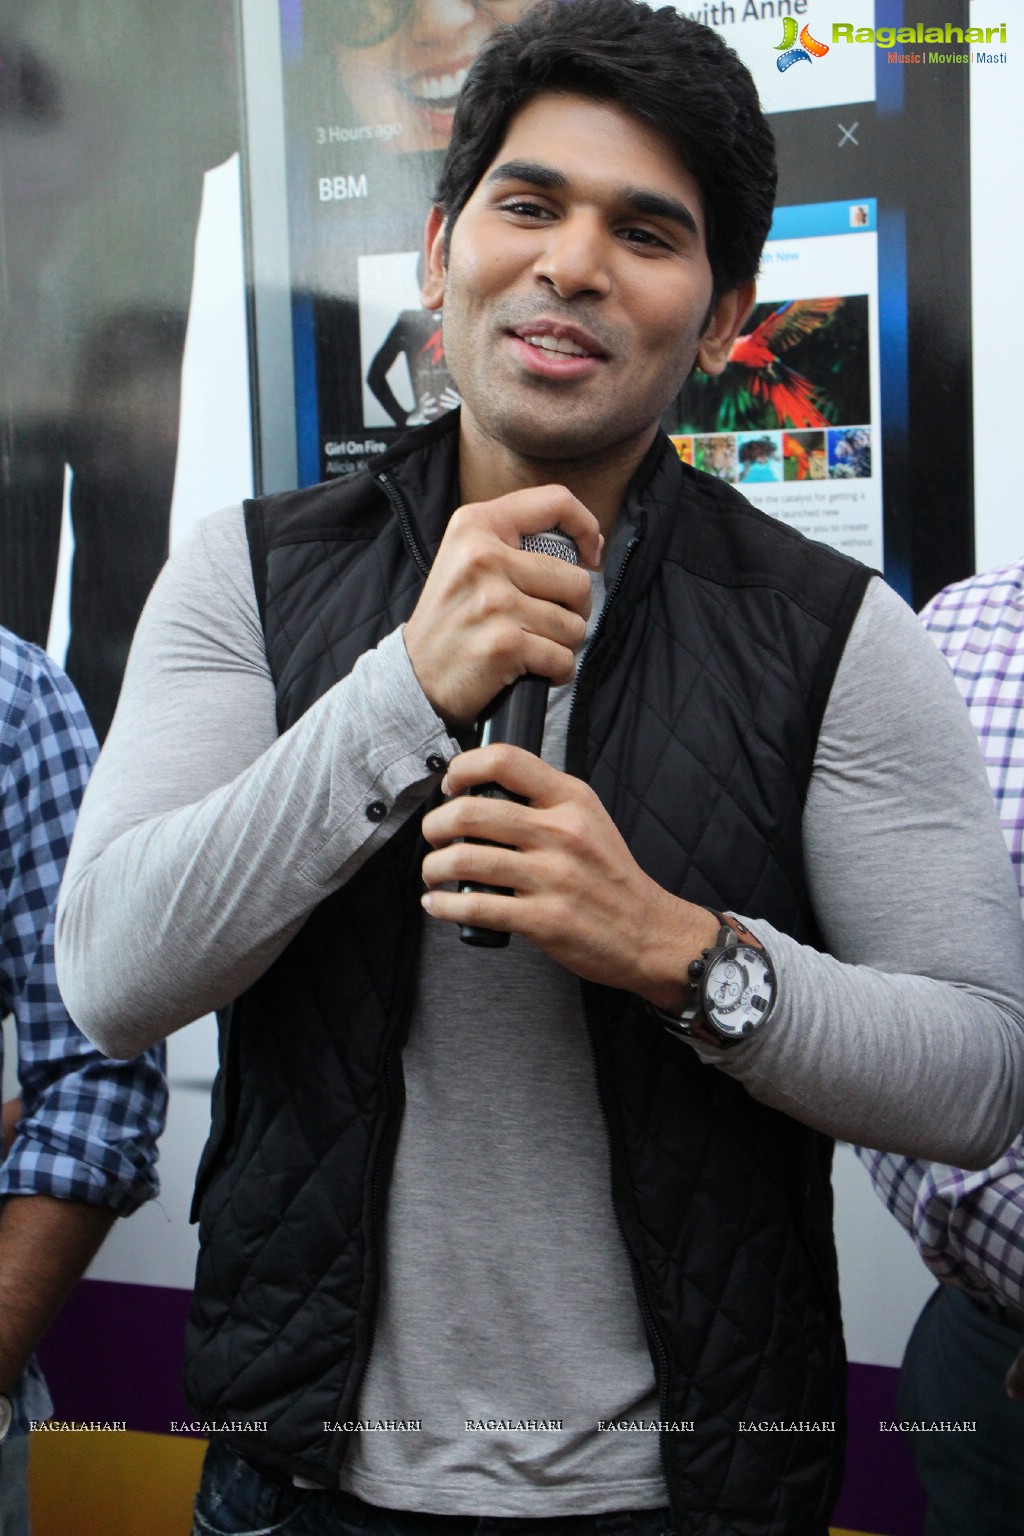 Allu Sirish launches Exclusive Offer on Blackberry Z10 at Lot Mobiles, Hyderabad